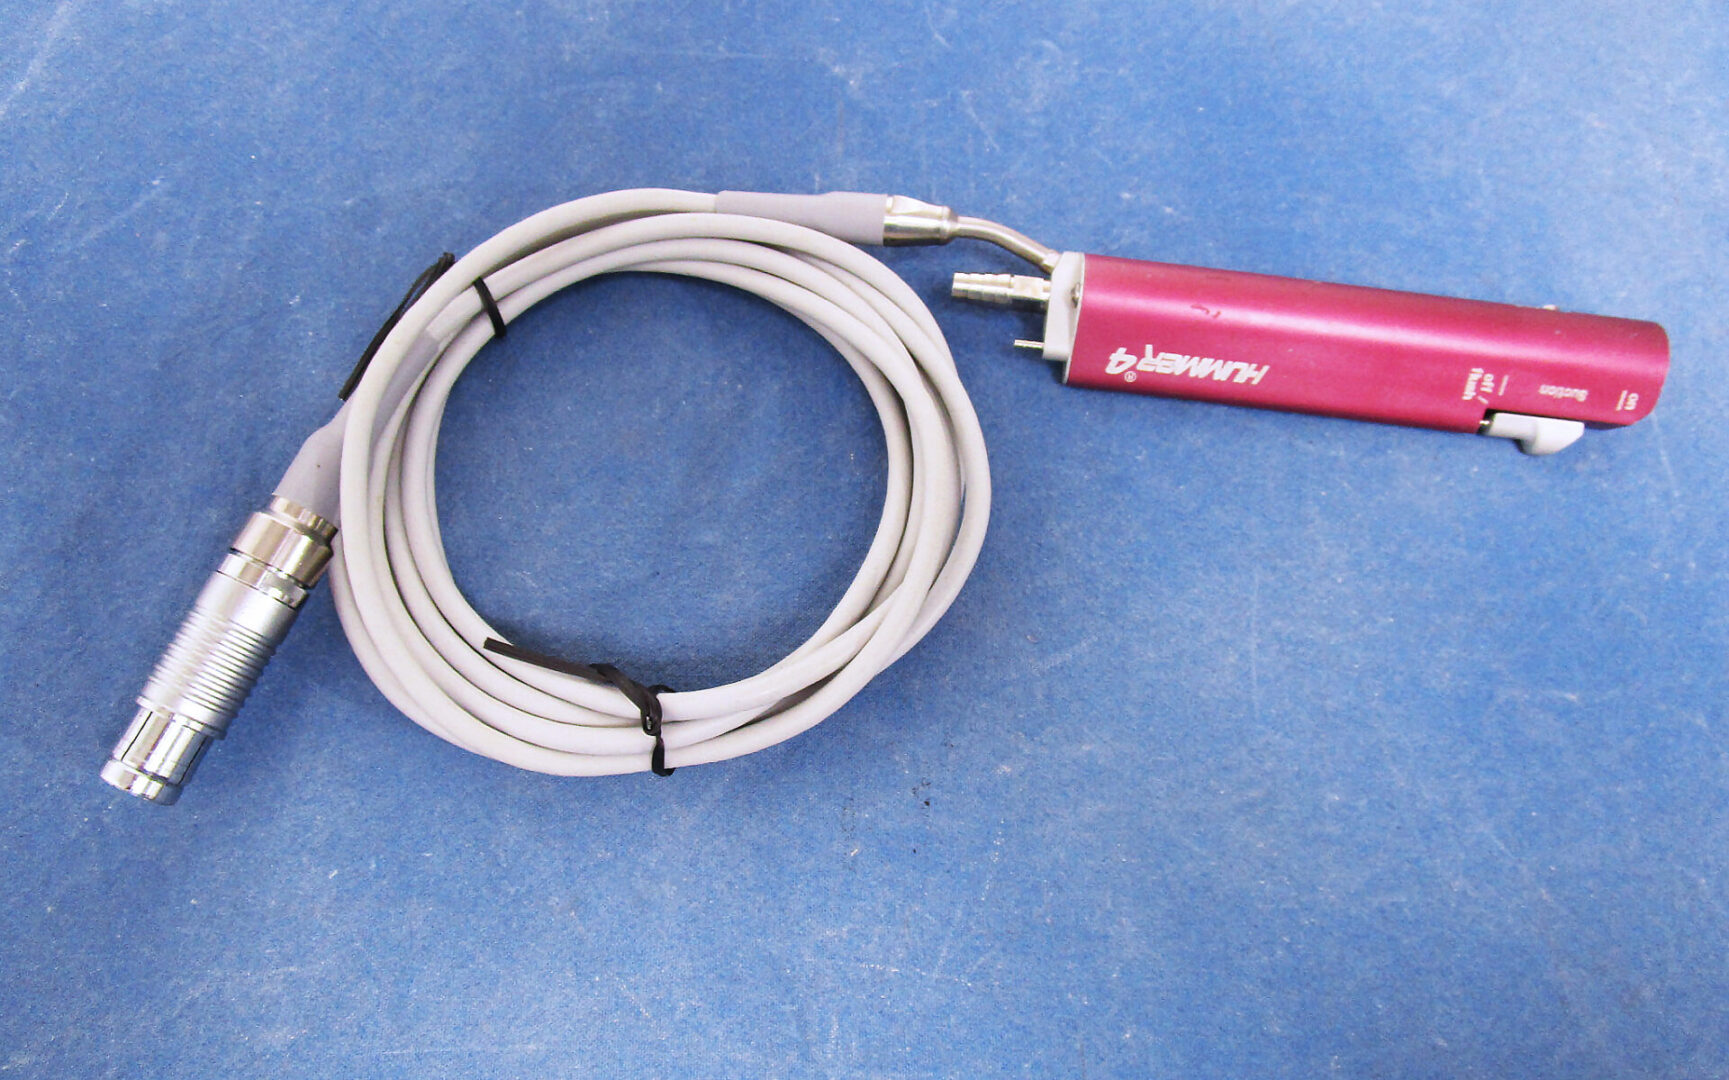 A pink and white cable on top of blue background.